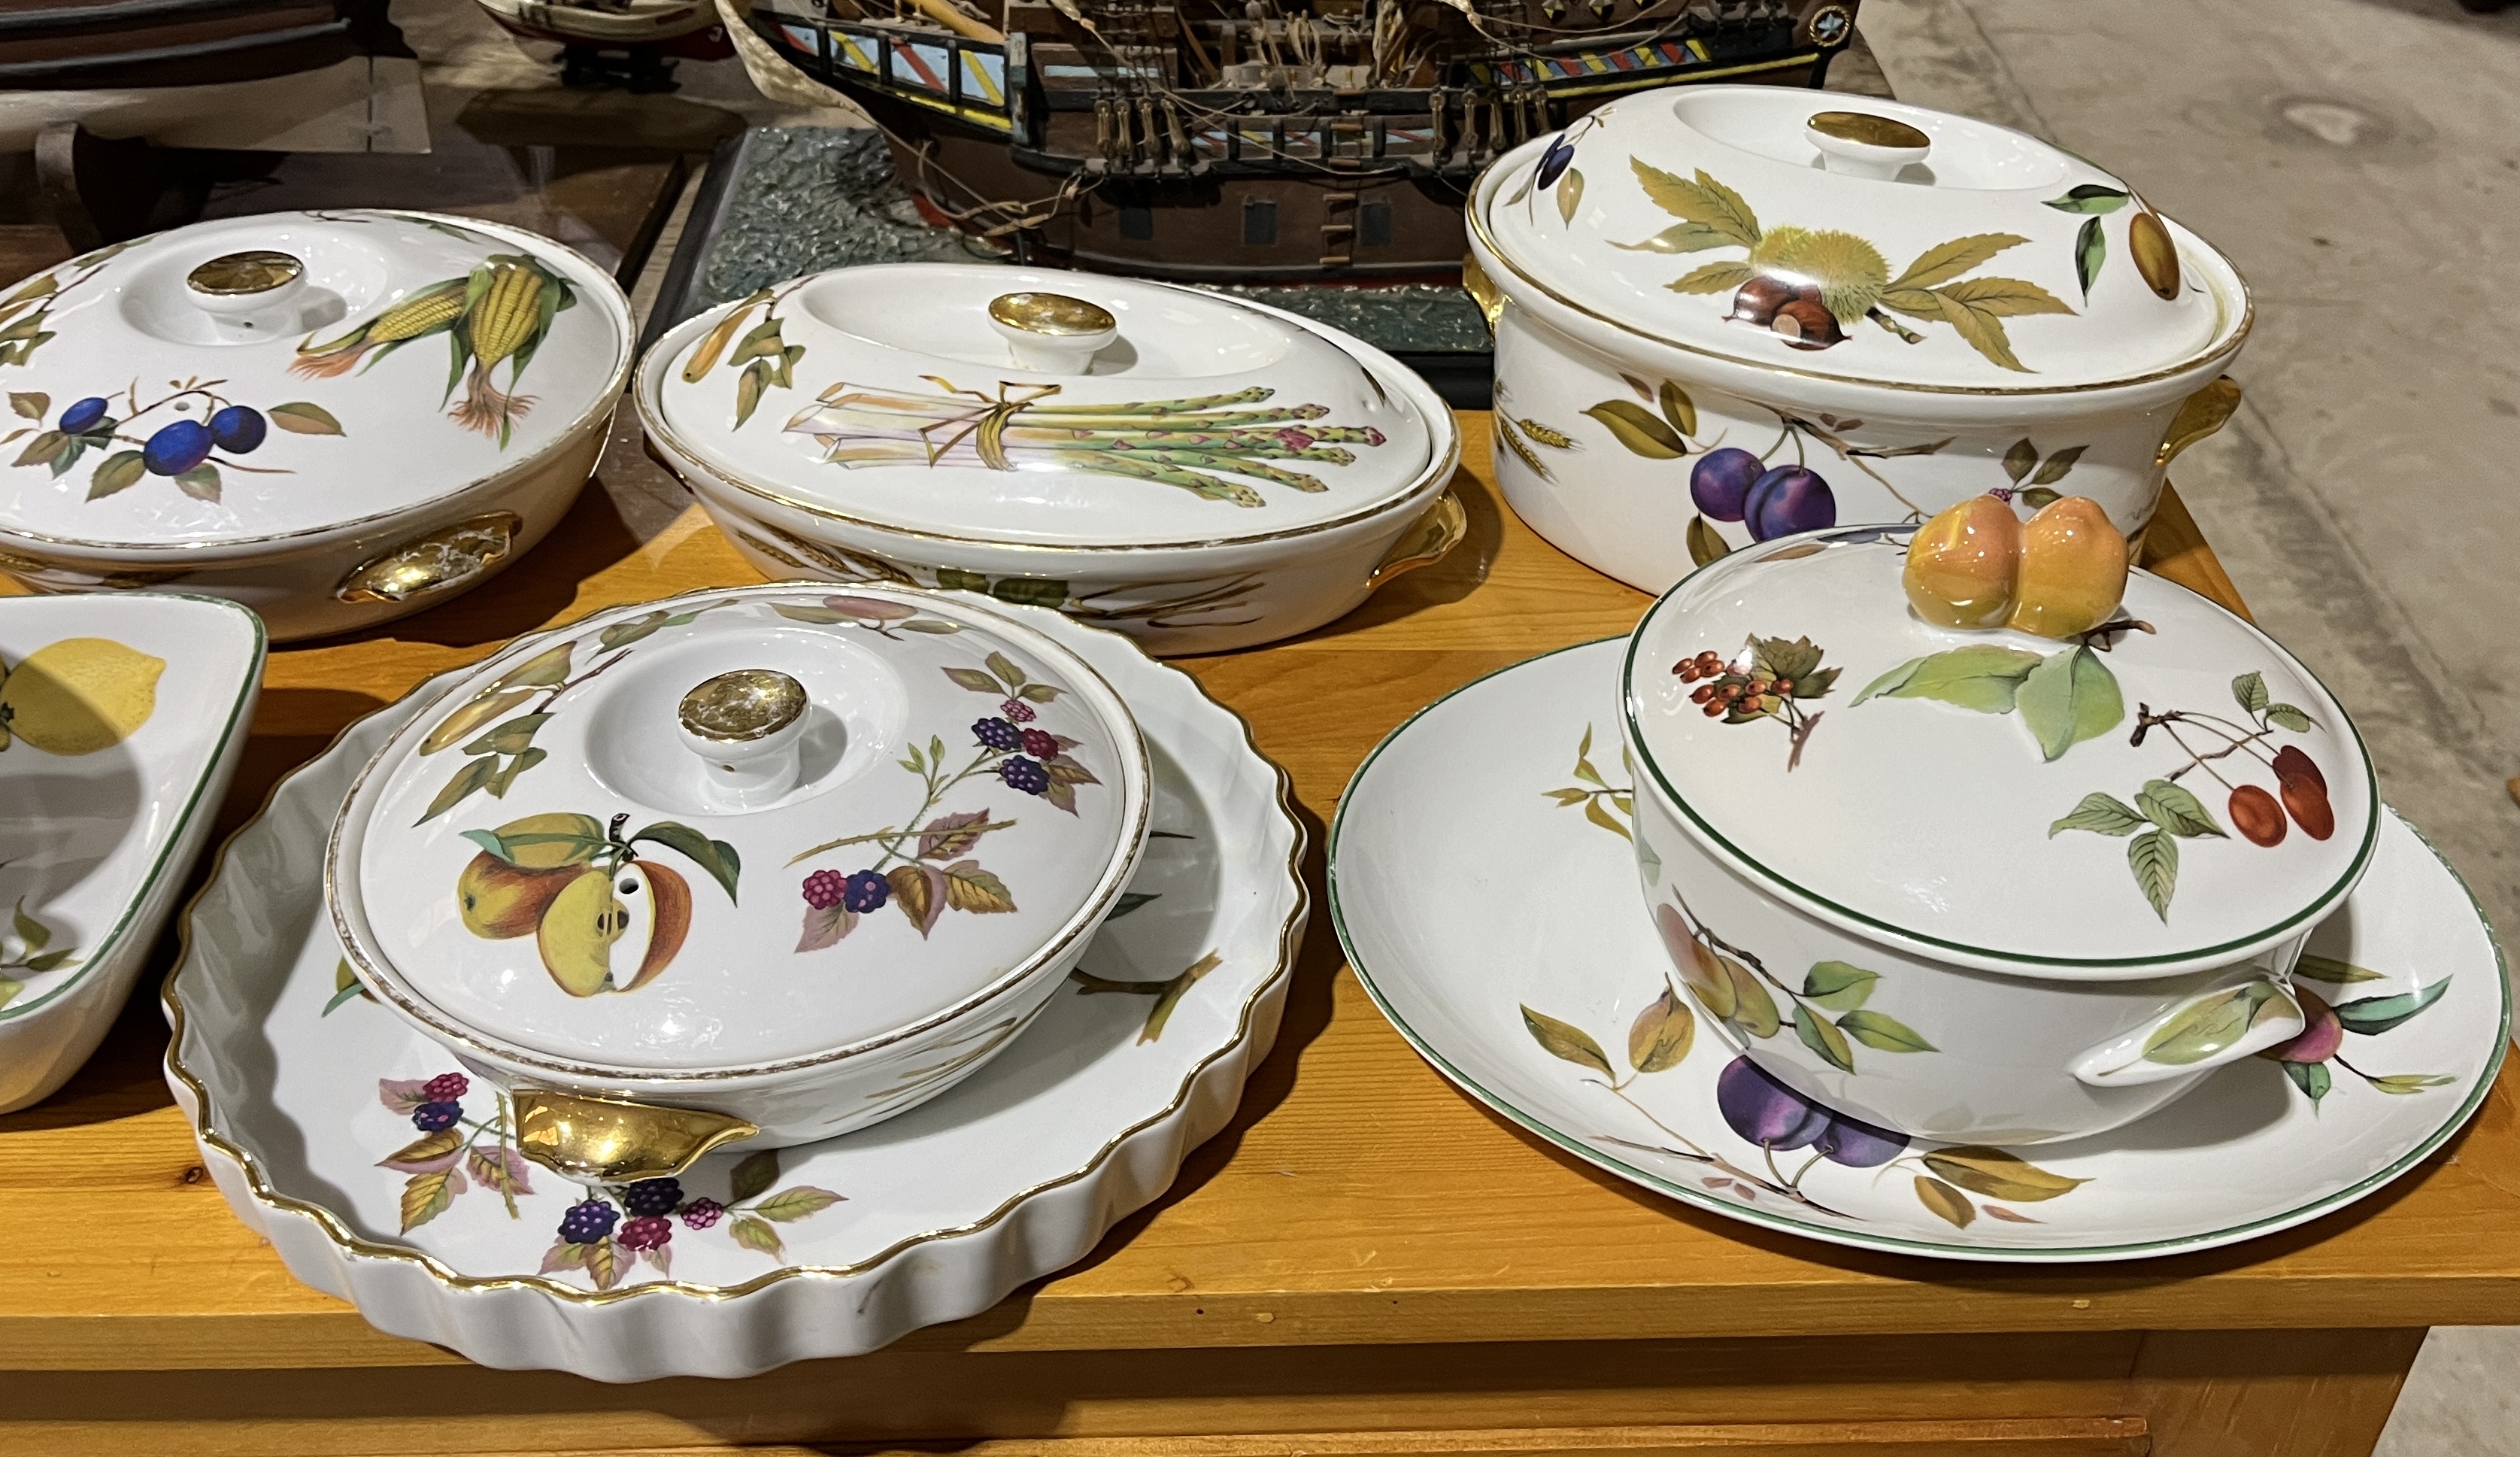 A large collection of Royal Worcester "Evesham" dinner ware including plates, bowls, terrines etc. - Image 2 of 4